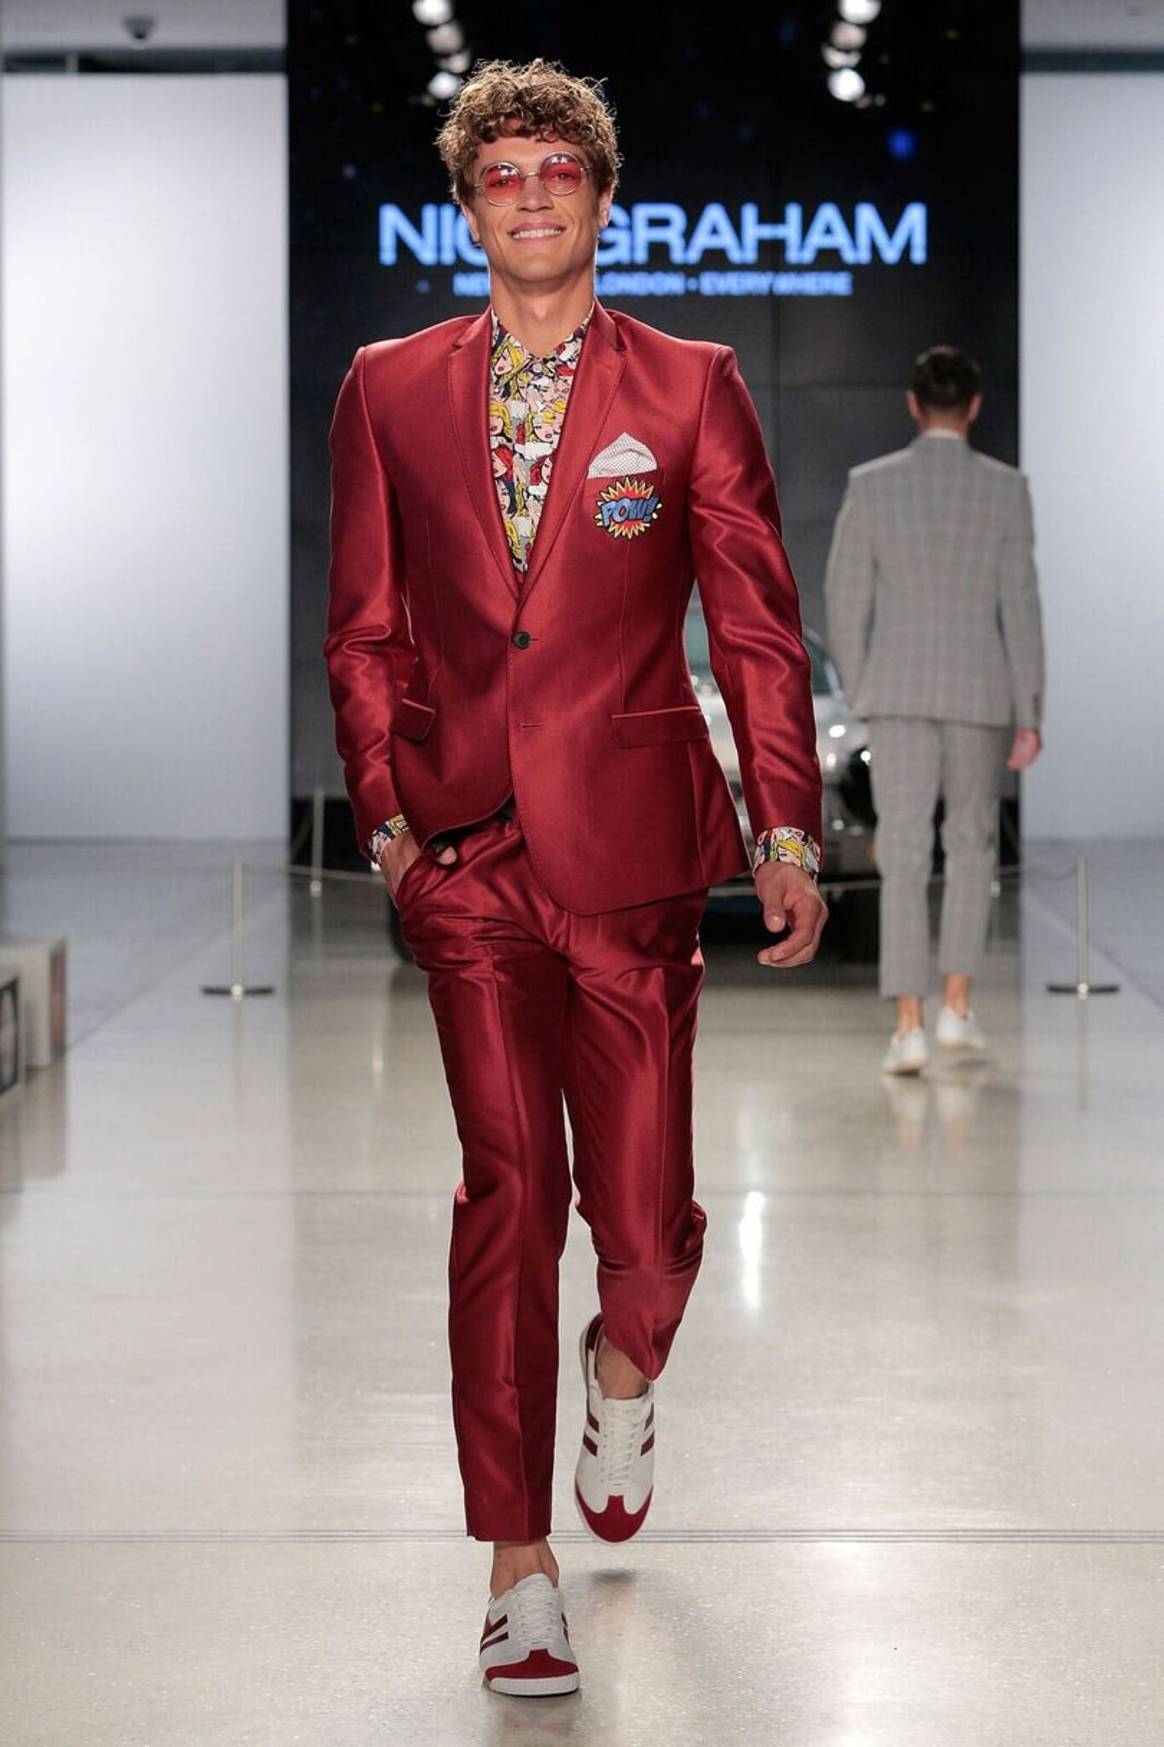 Nick Graham finds sixties inspiration for NYFW: Men’s